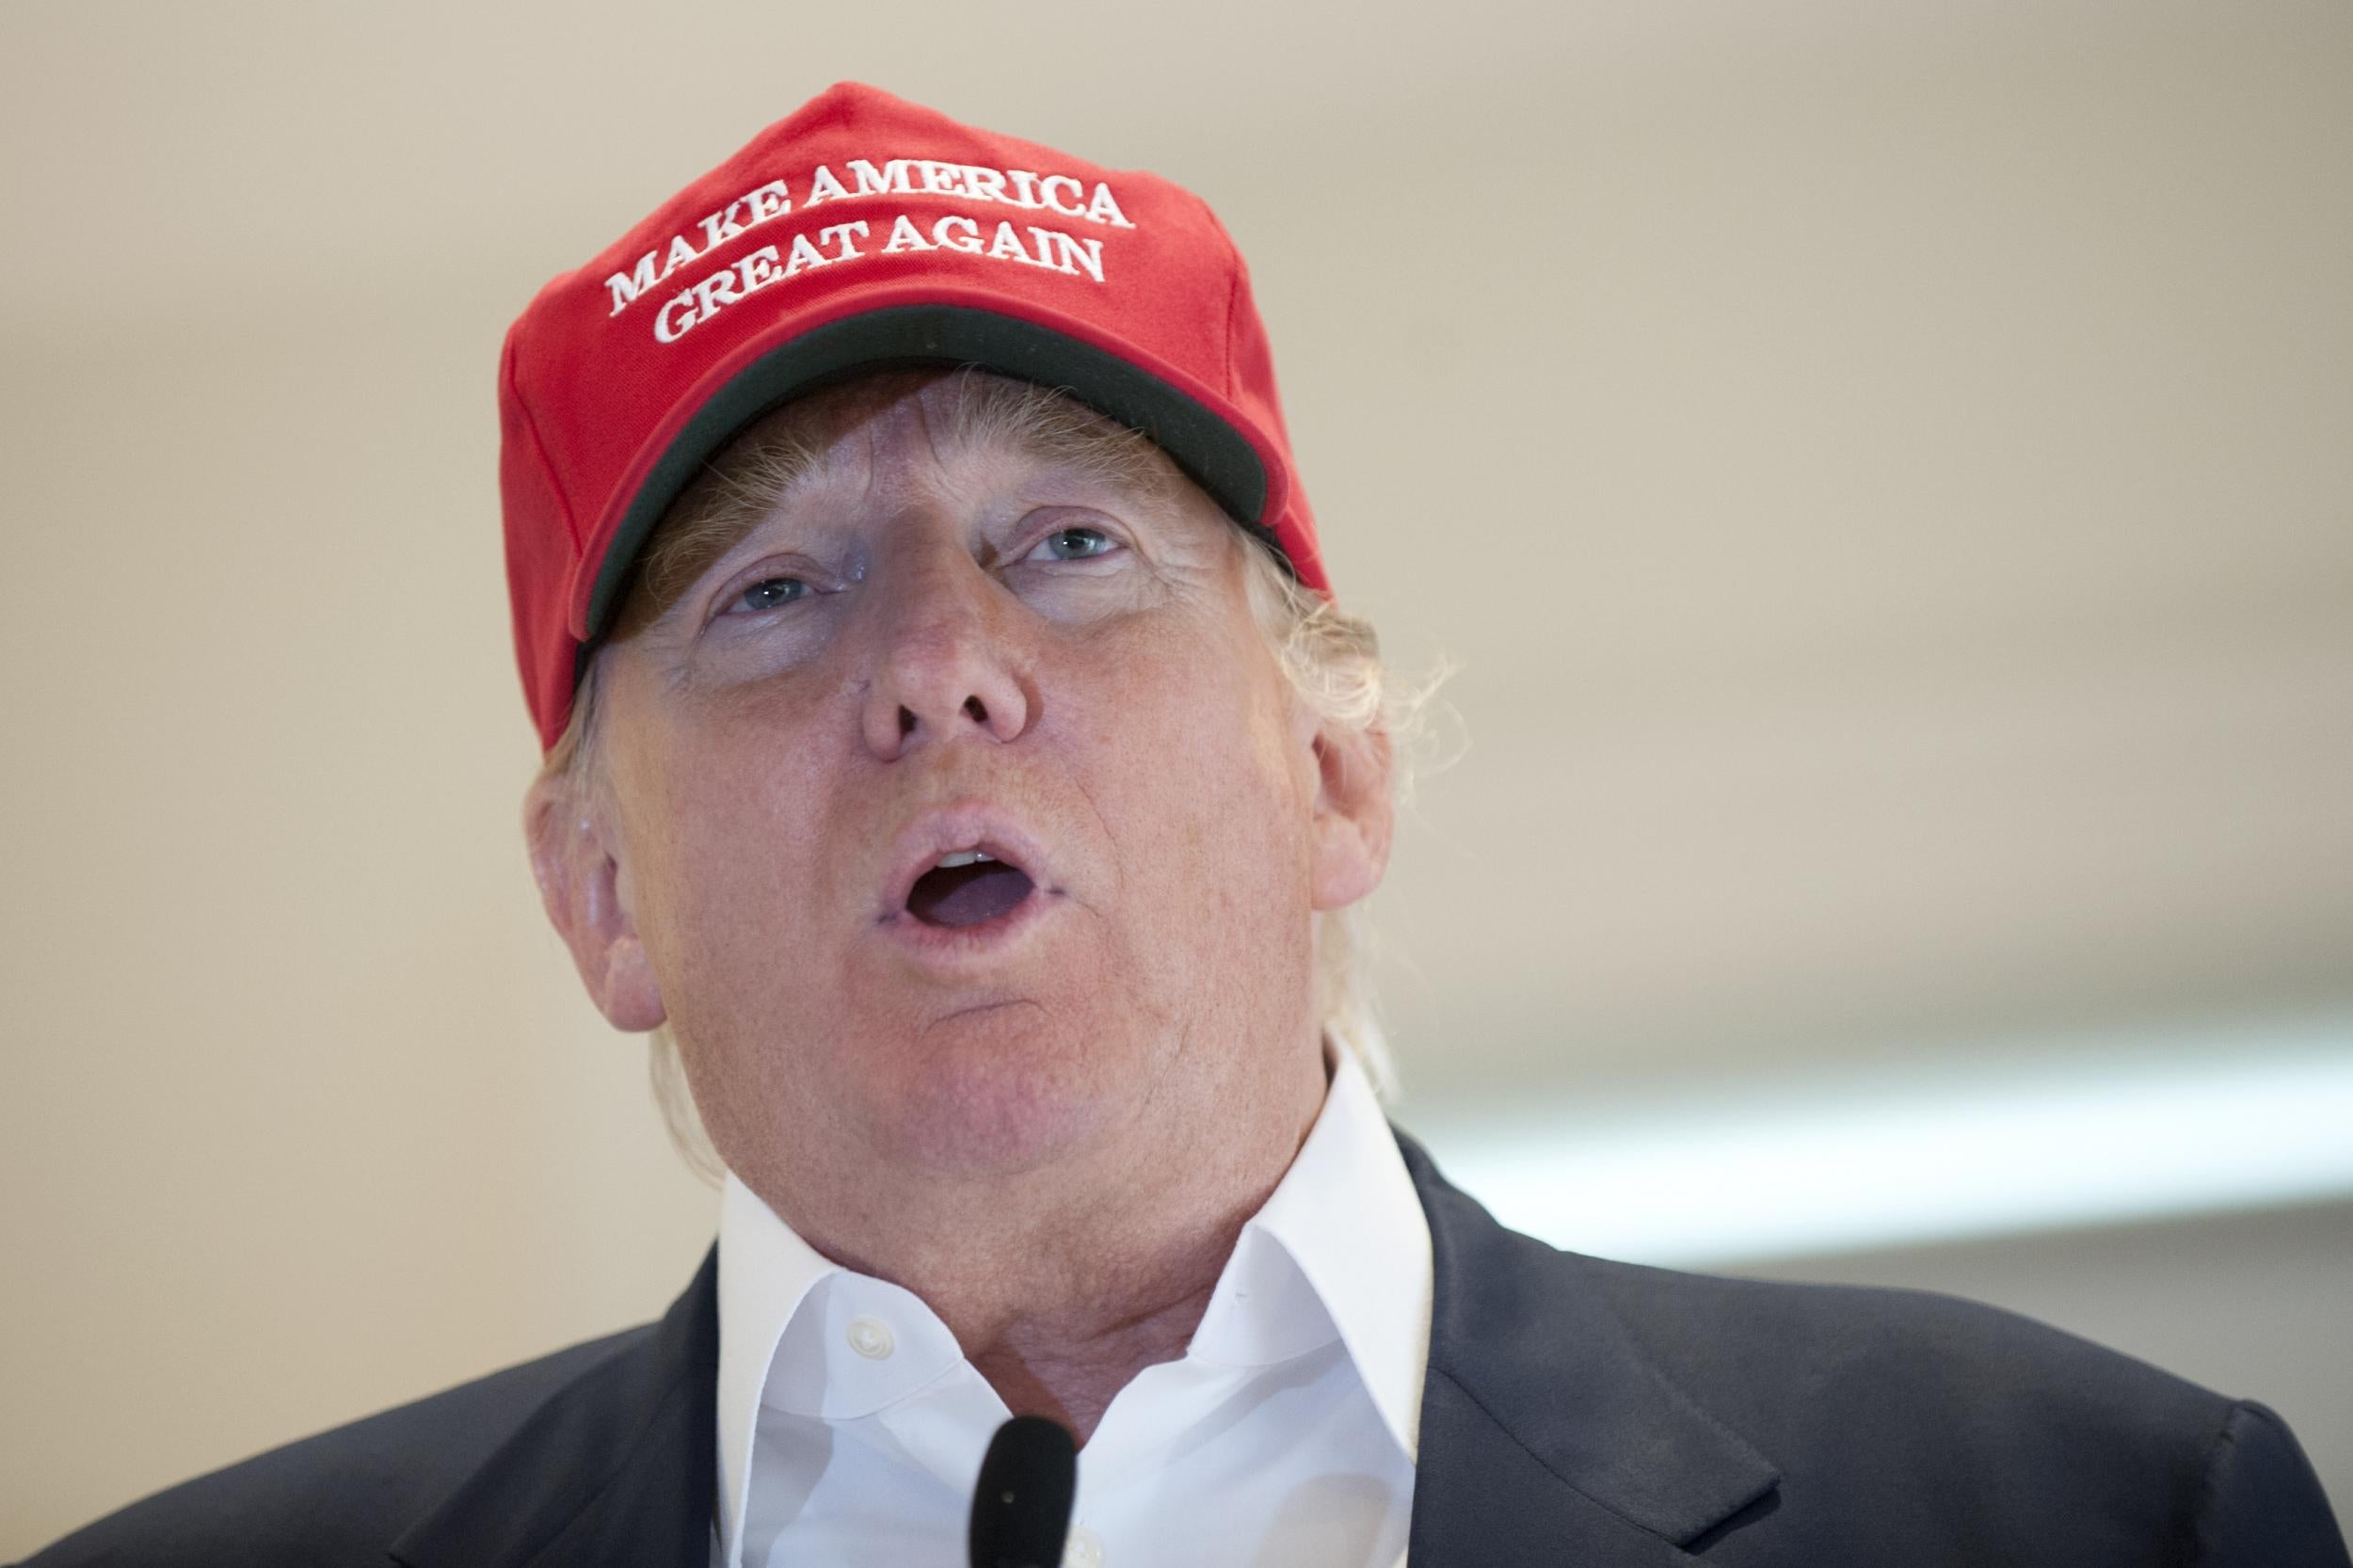 Donald Trump on Monday called to bar Muslims from entering the US.